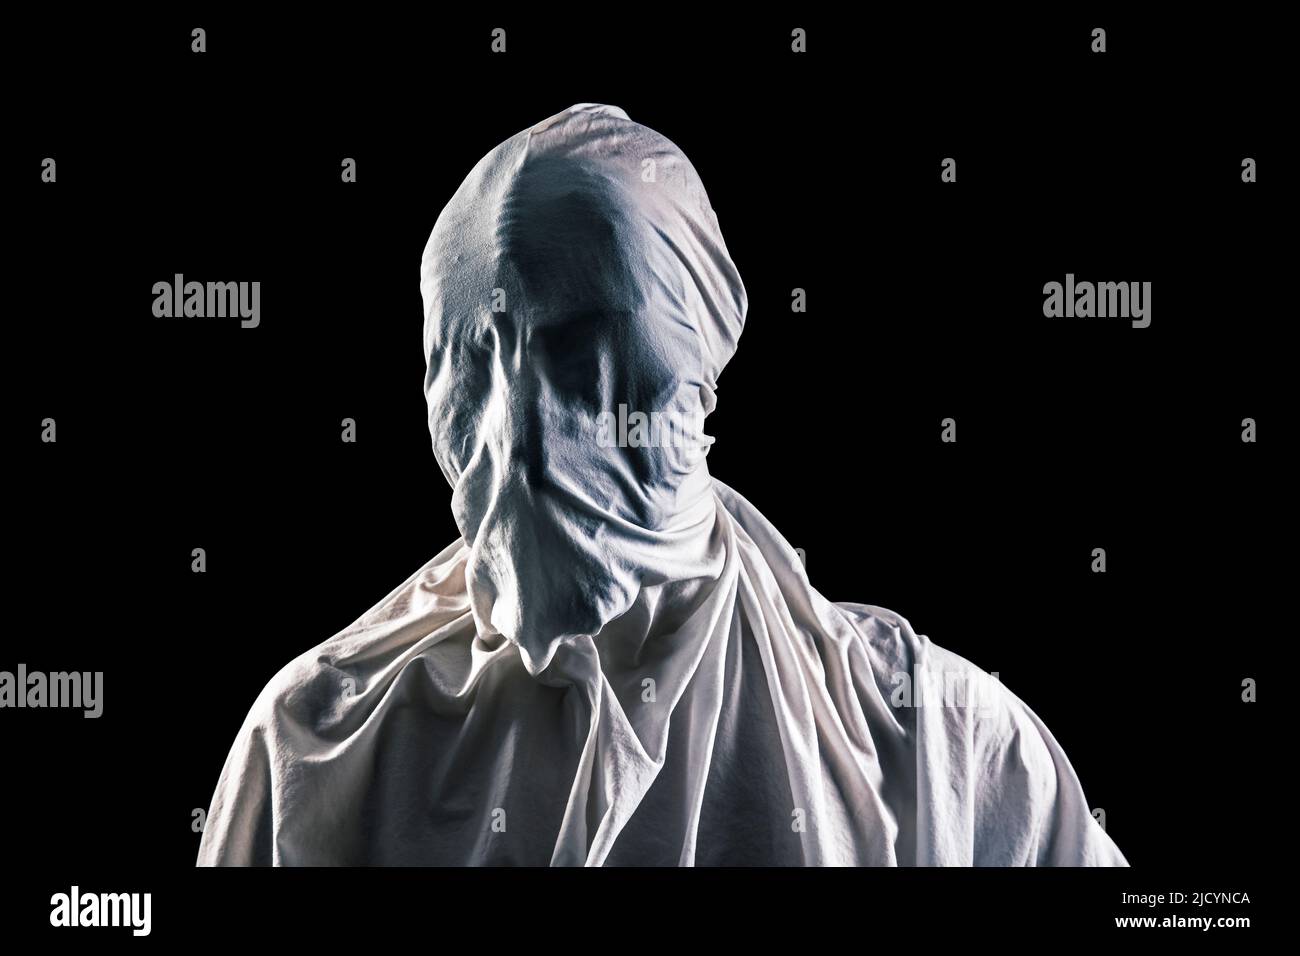 Portrait of a scary ghost isolated on black background with clipping path Stock Photo